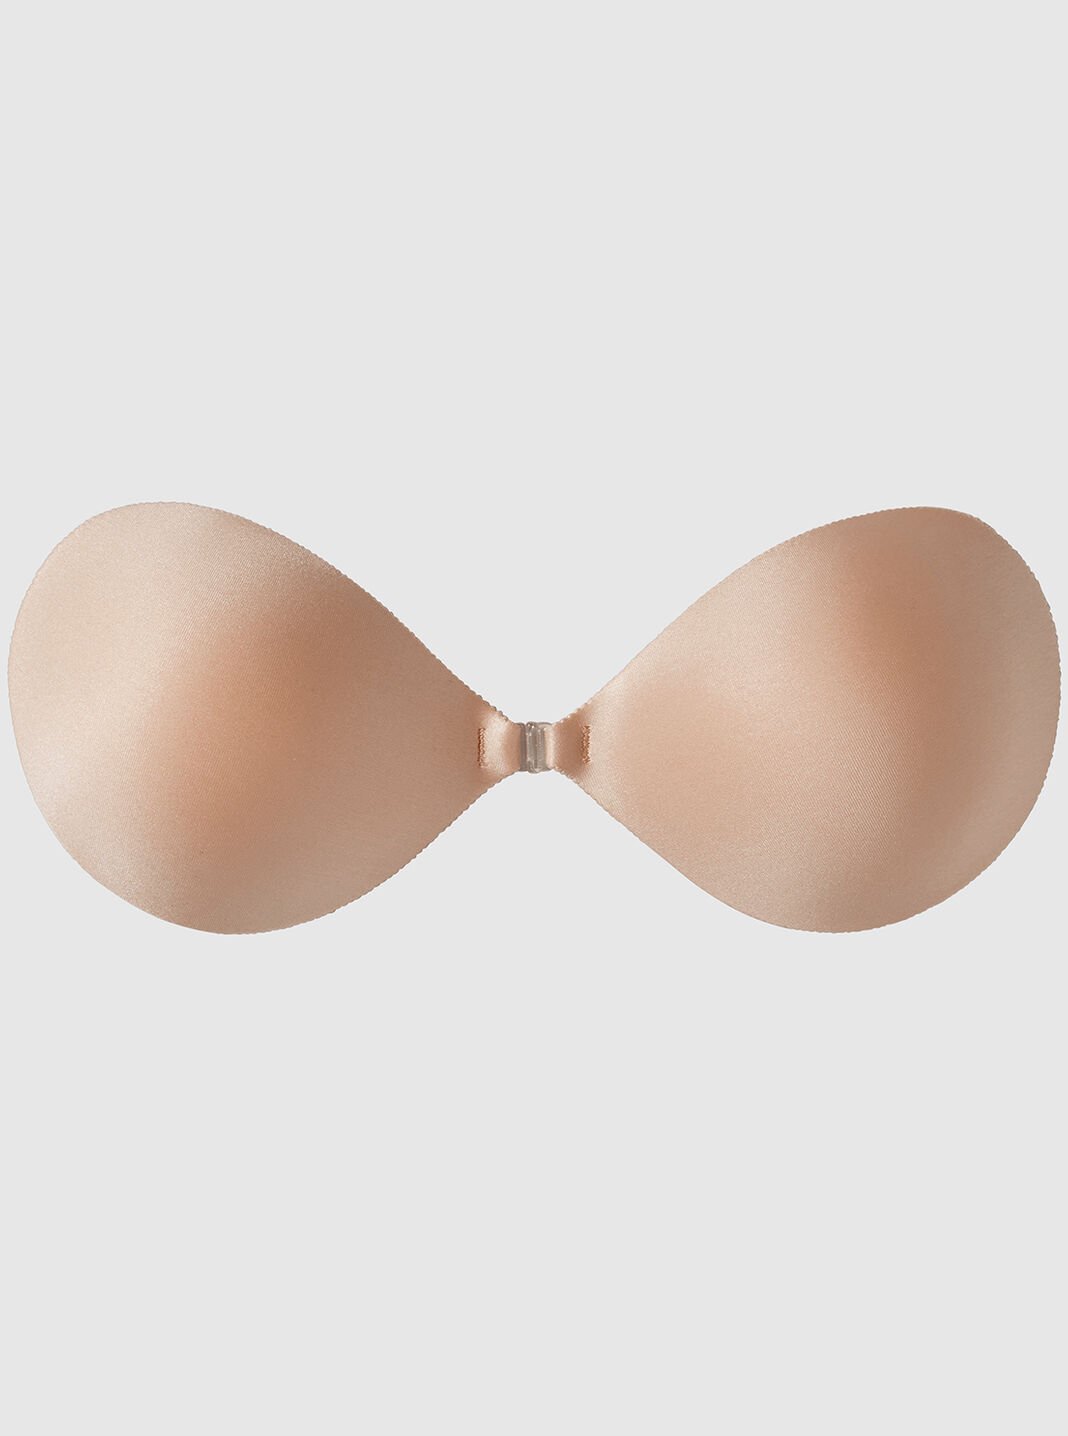 Backless Bras, Pasties & More Bra Accessories